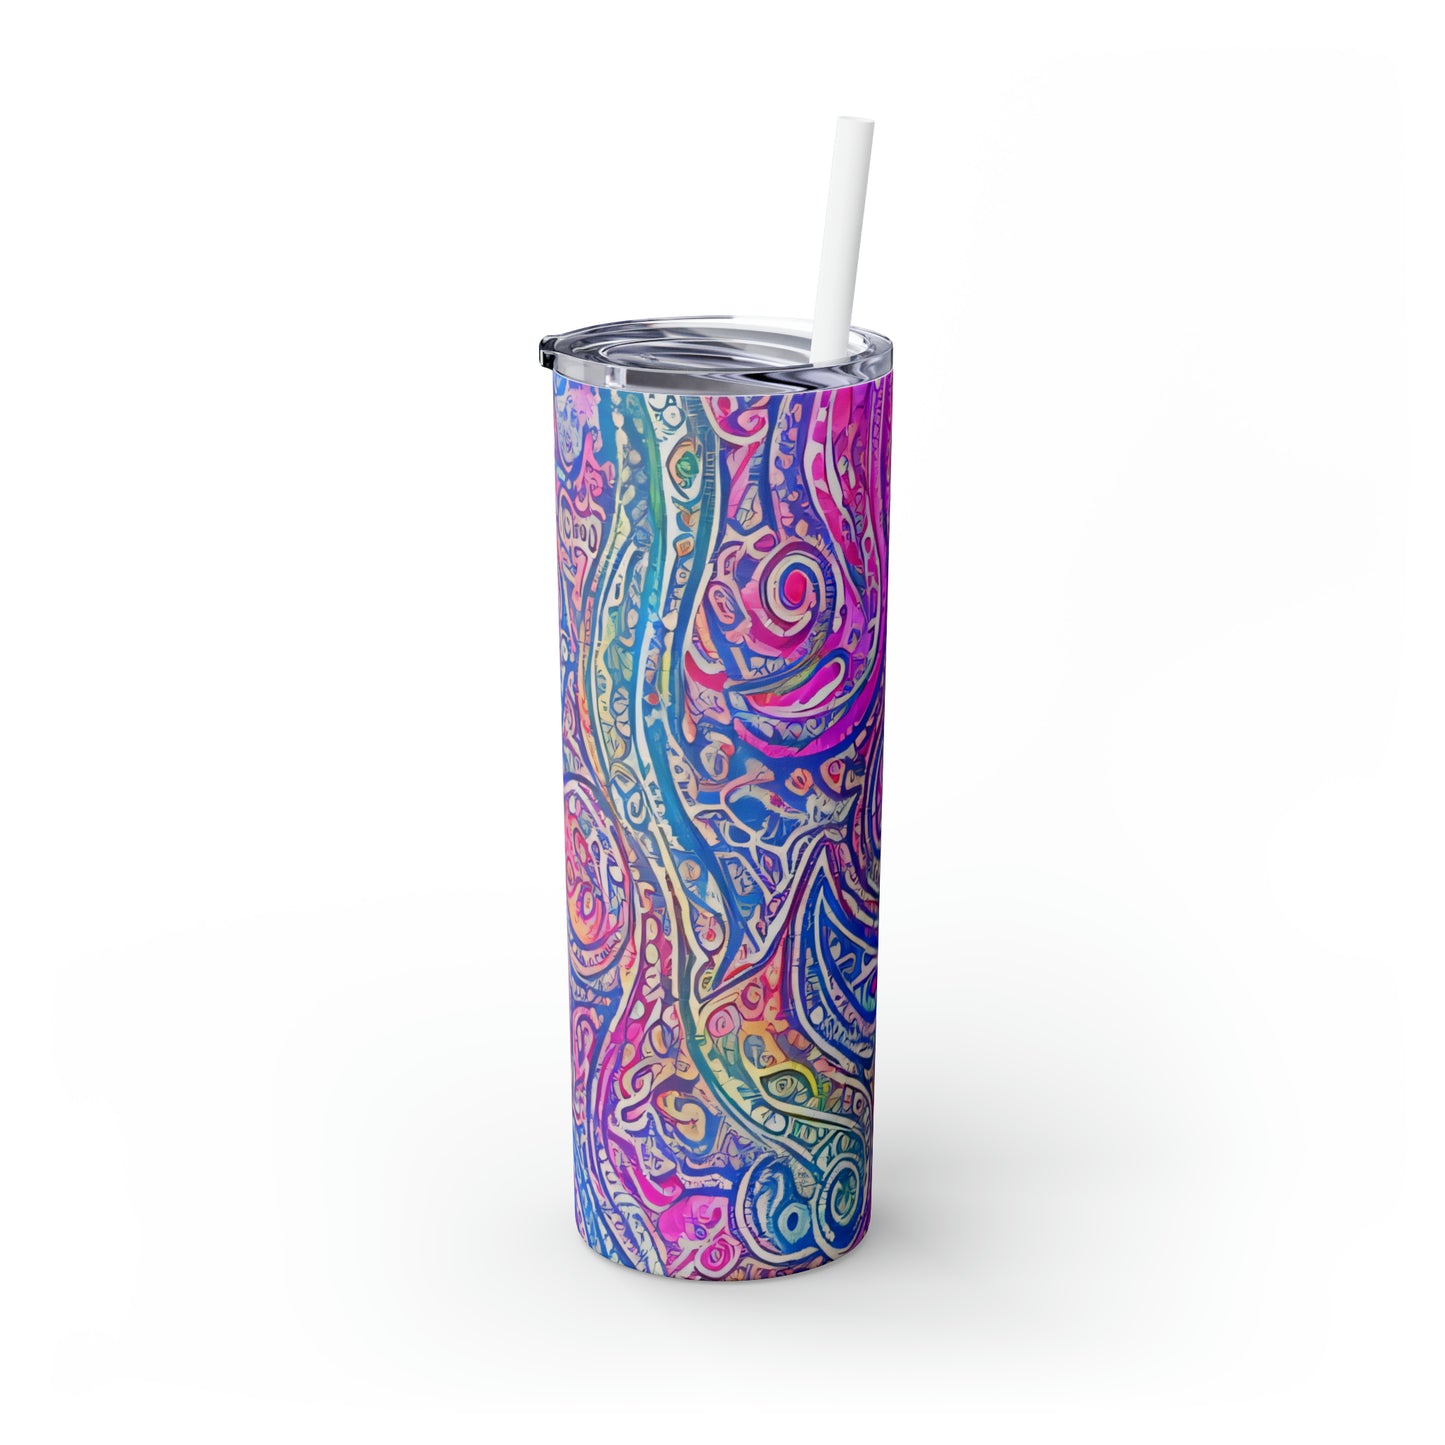 Amazing - Multicolored Watercolor Paisley 1 - Skinny Tumbler with Straw, 20oz - Stainless Steel